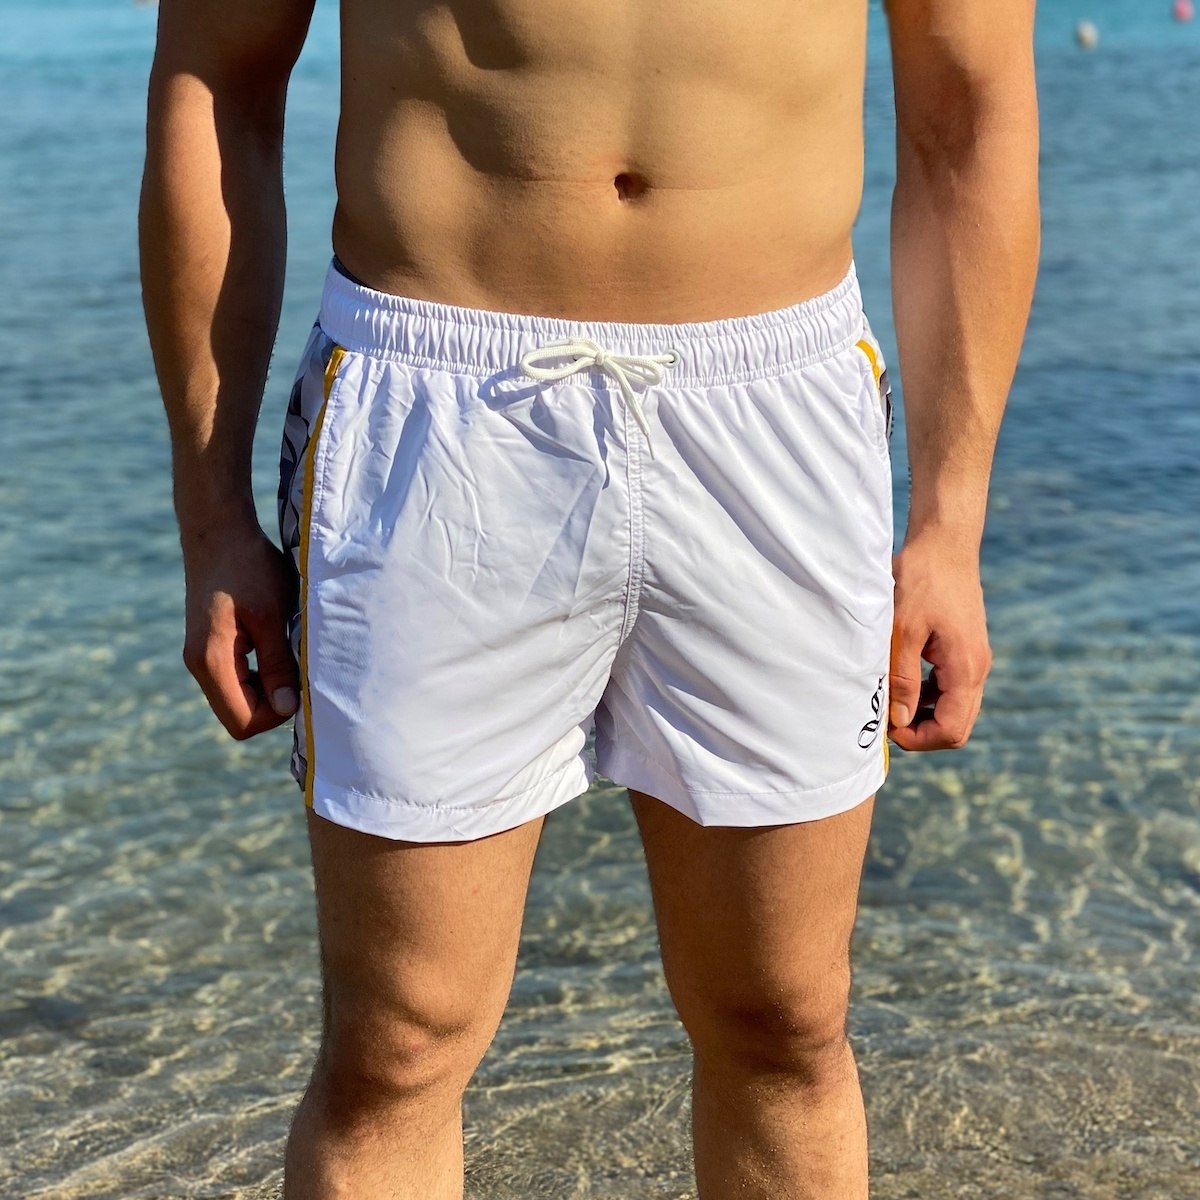 Men's Swimming Short With Geometric Lines